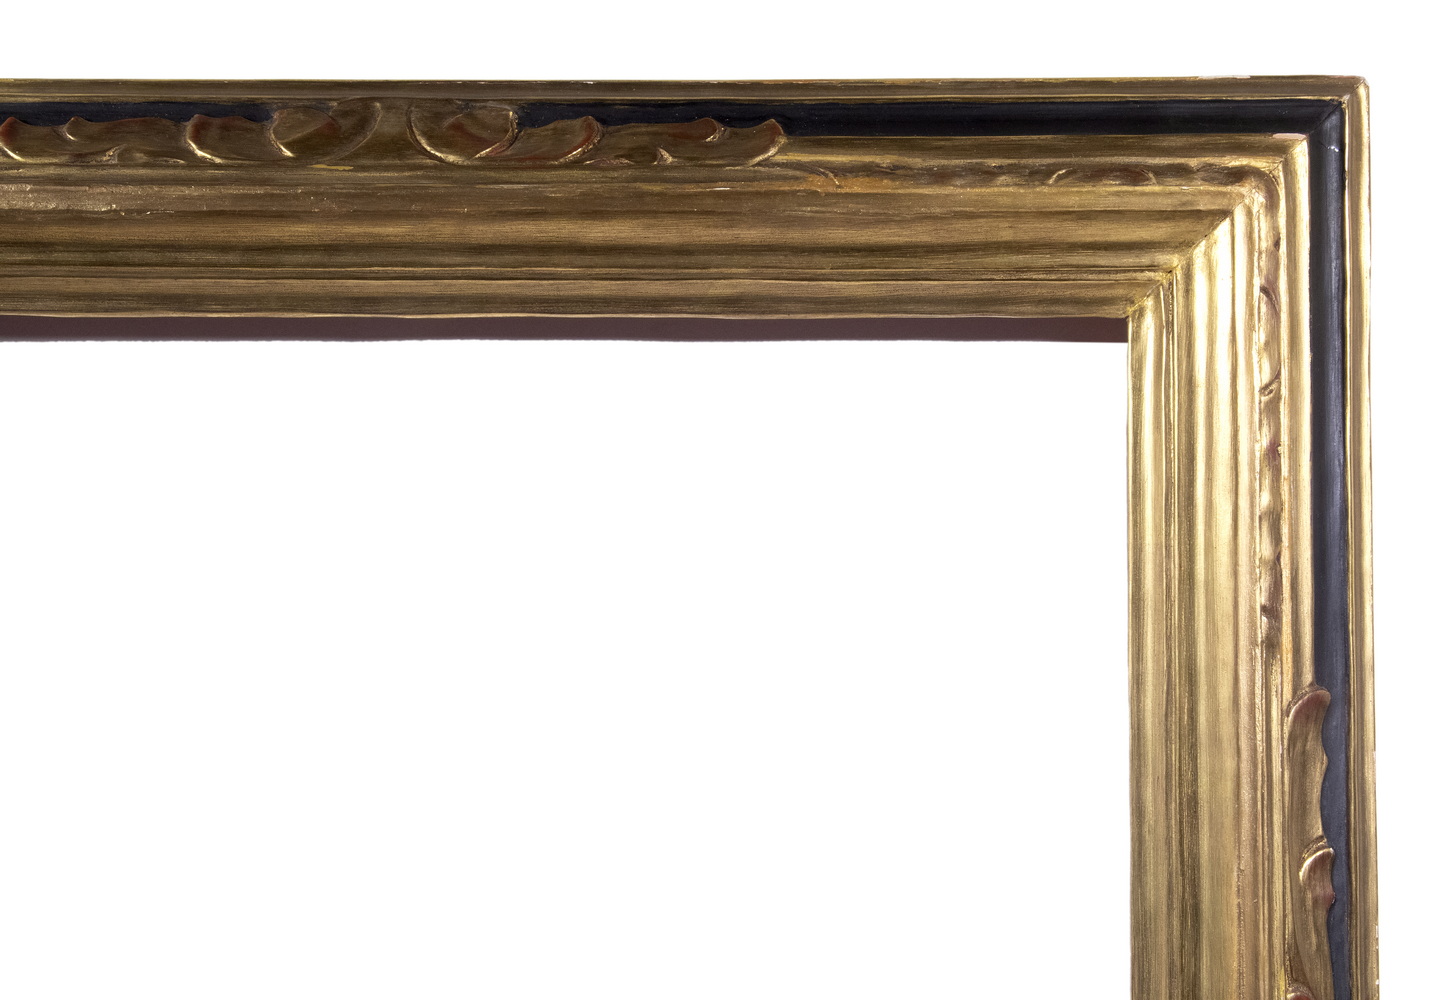 HANDCARVED FRAME BY THULIN Scrollwork 29e3fb